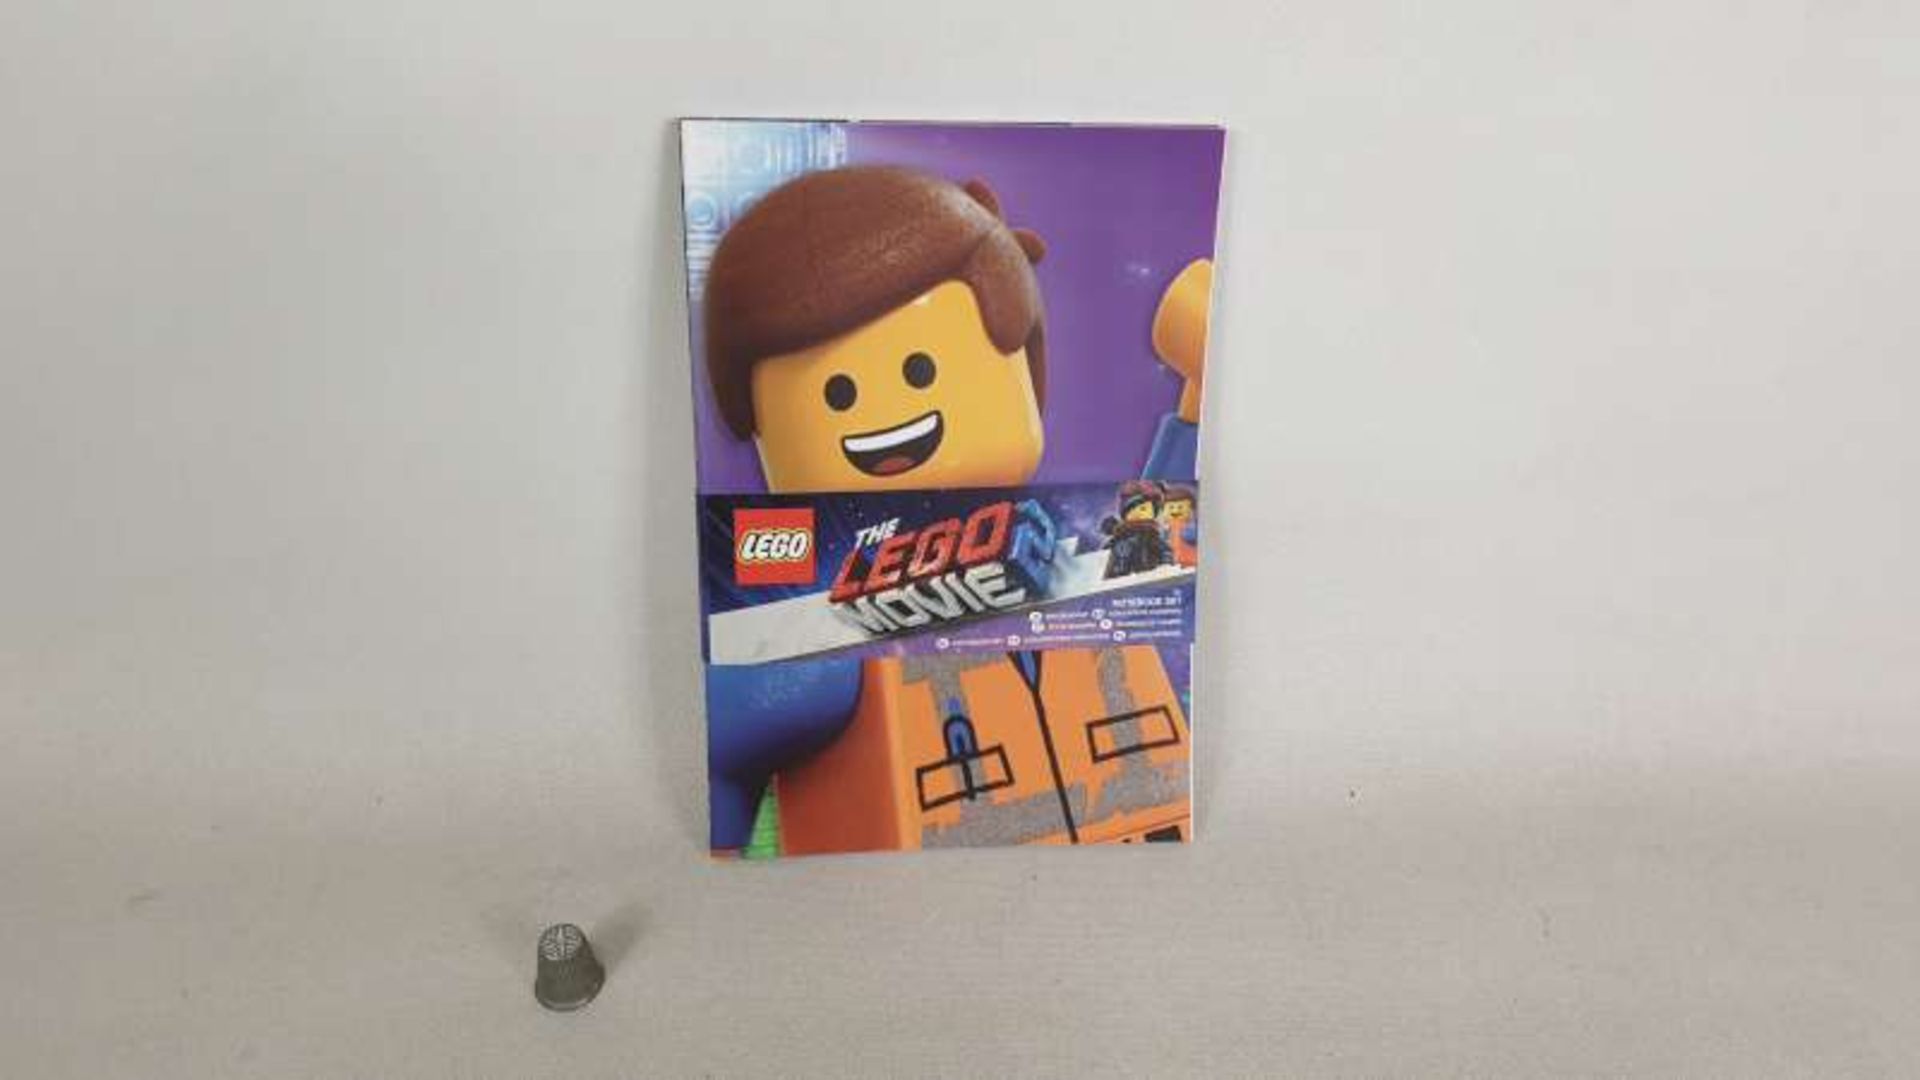 96 X PACKS OF 2 LEGO NOTEBOOKS IN 2 BOXES